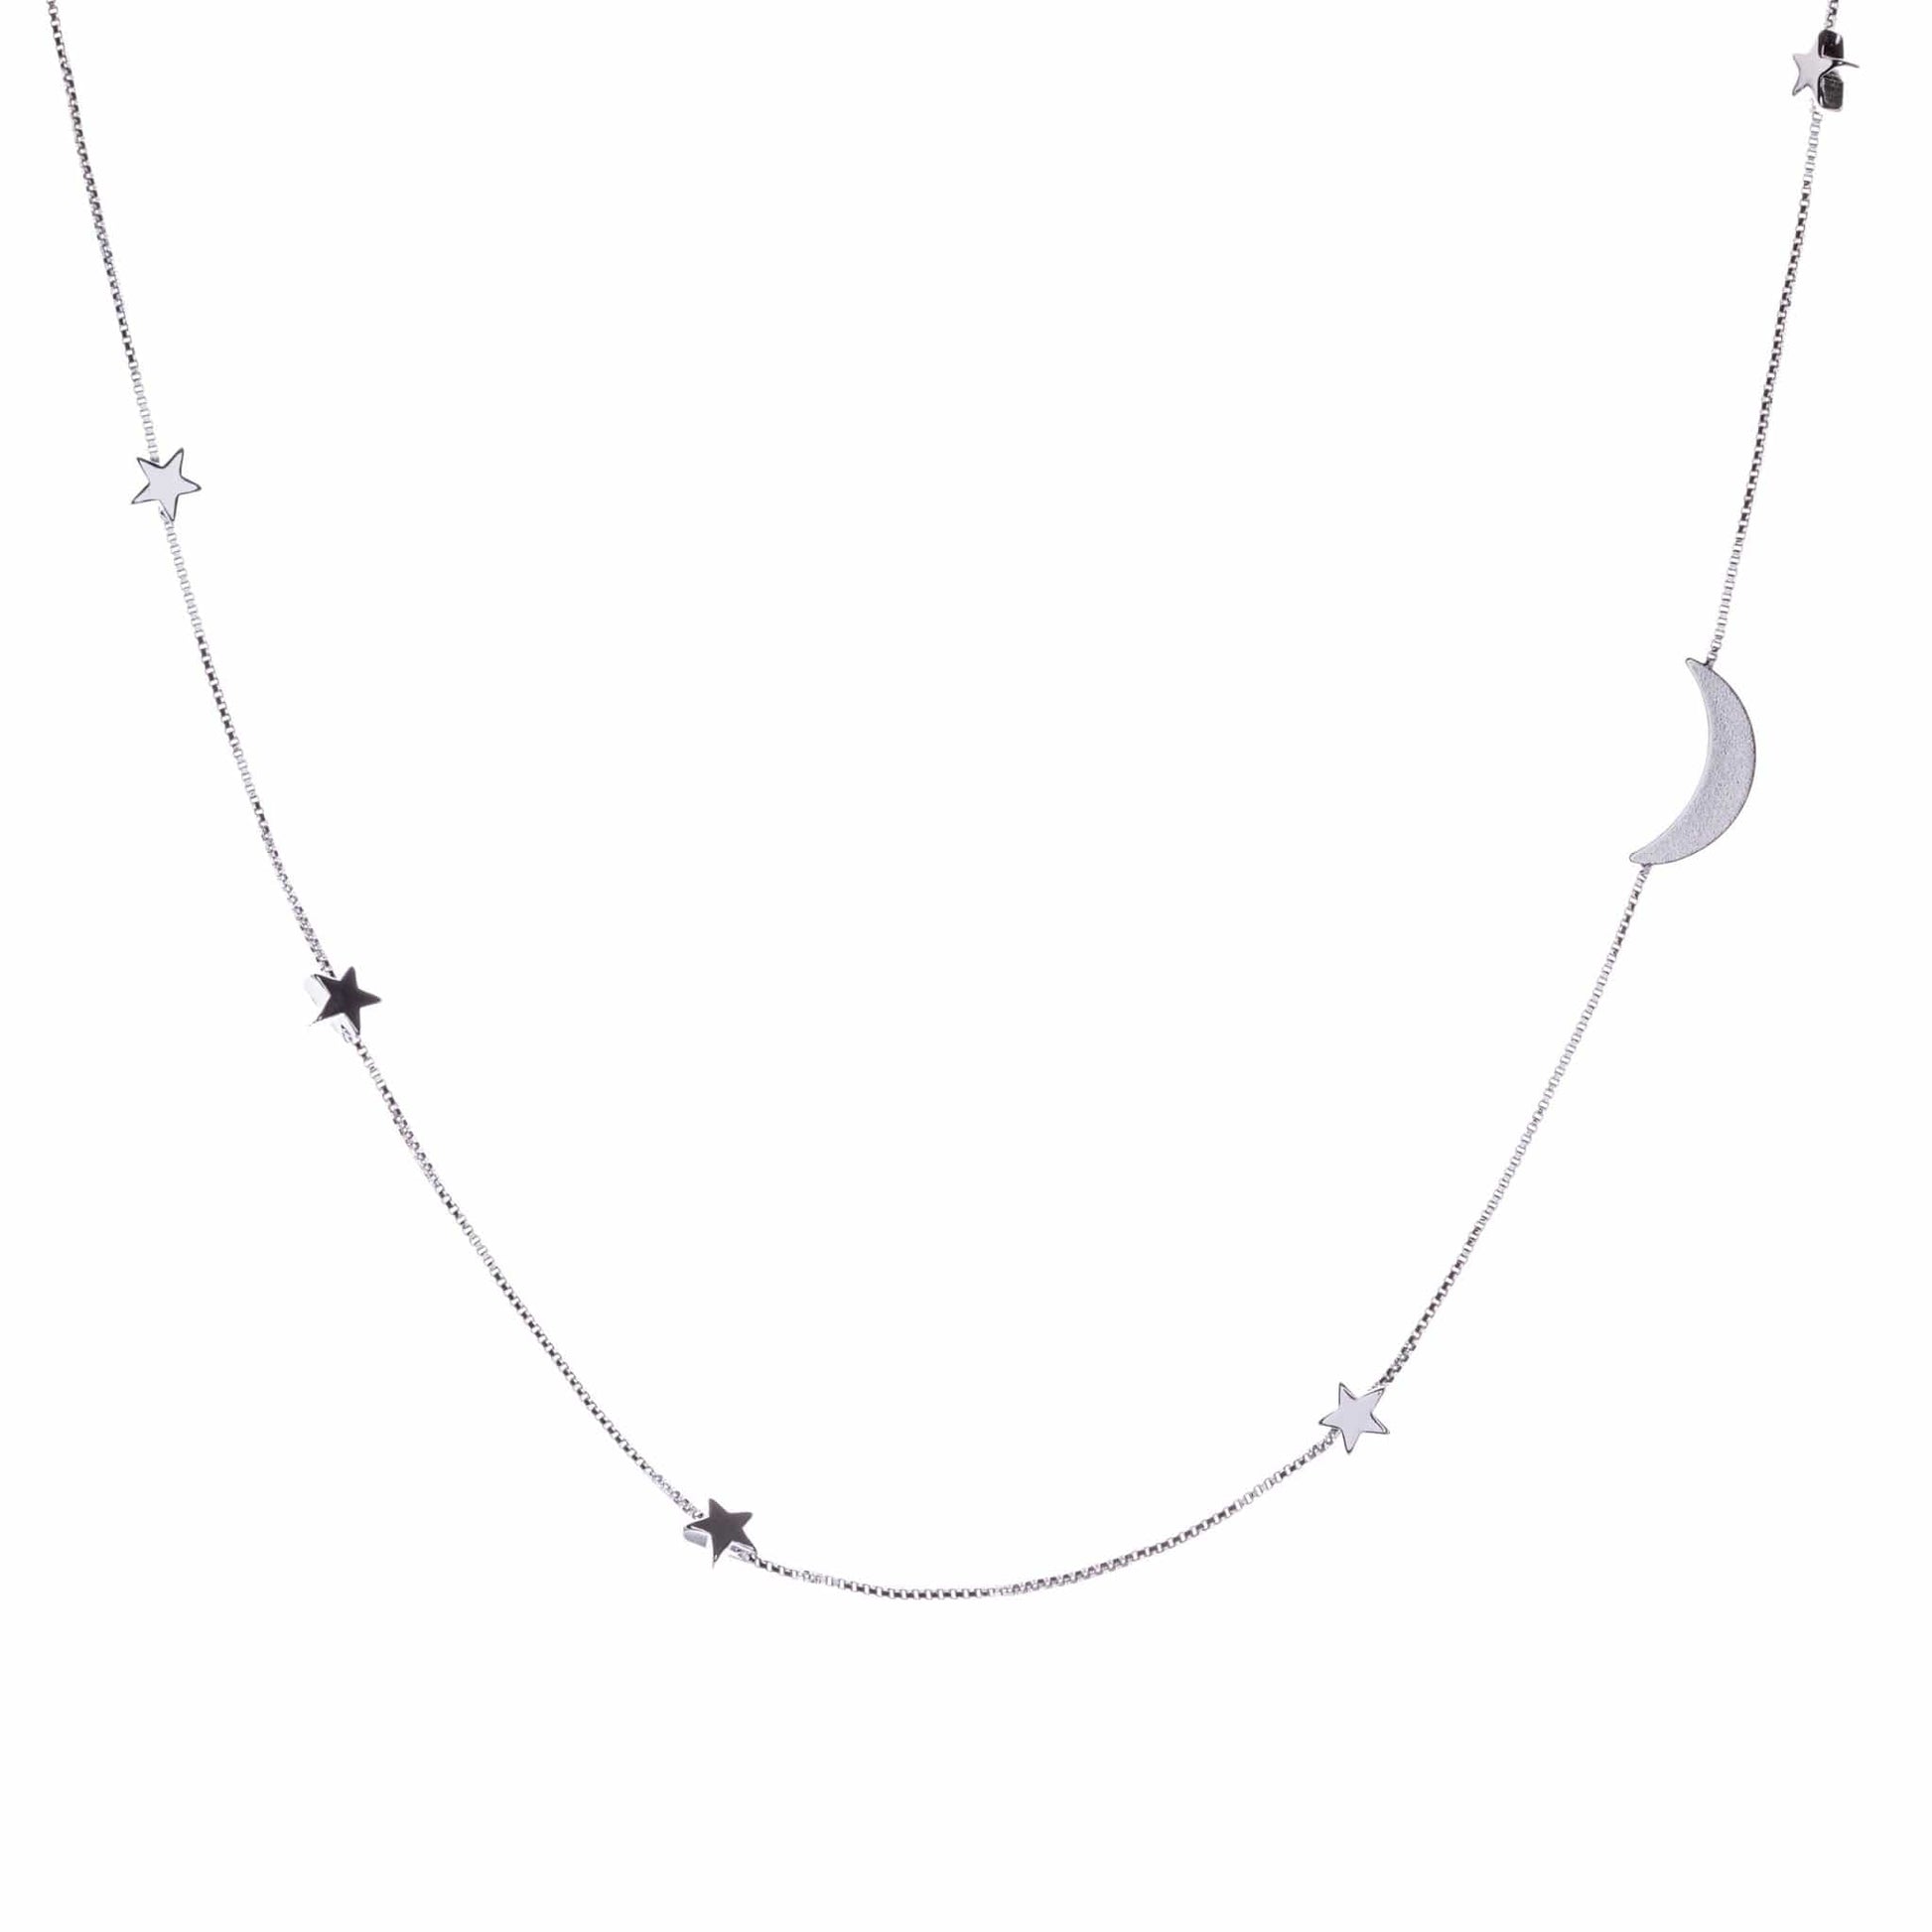 Silver box necklace with delicate star and moon